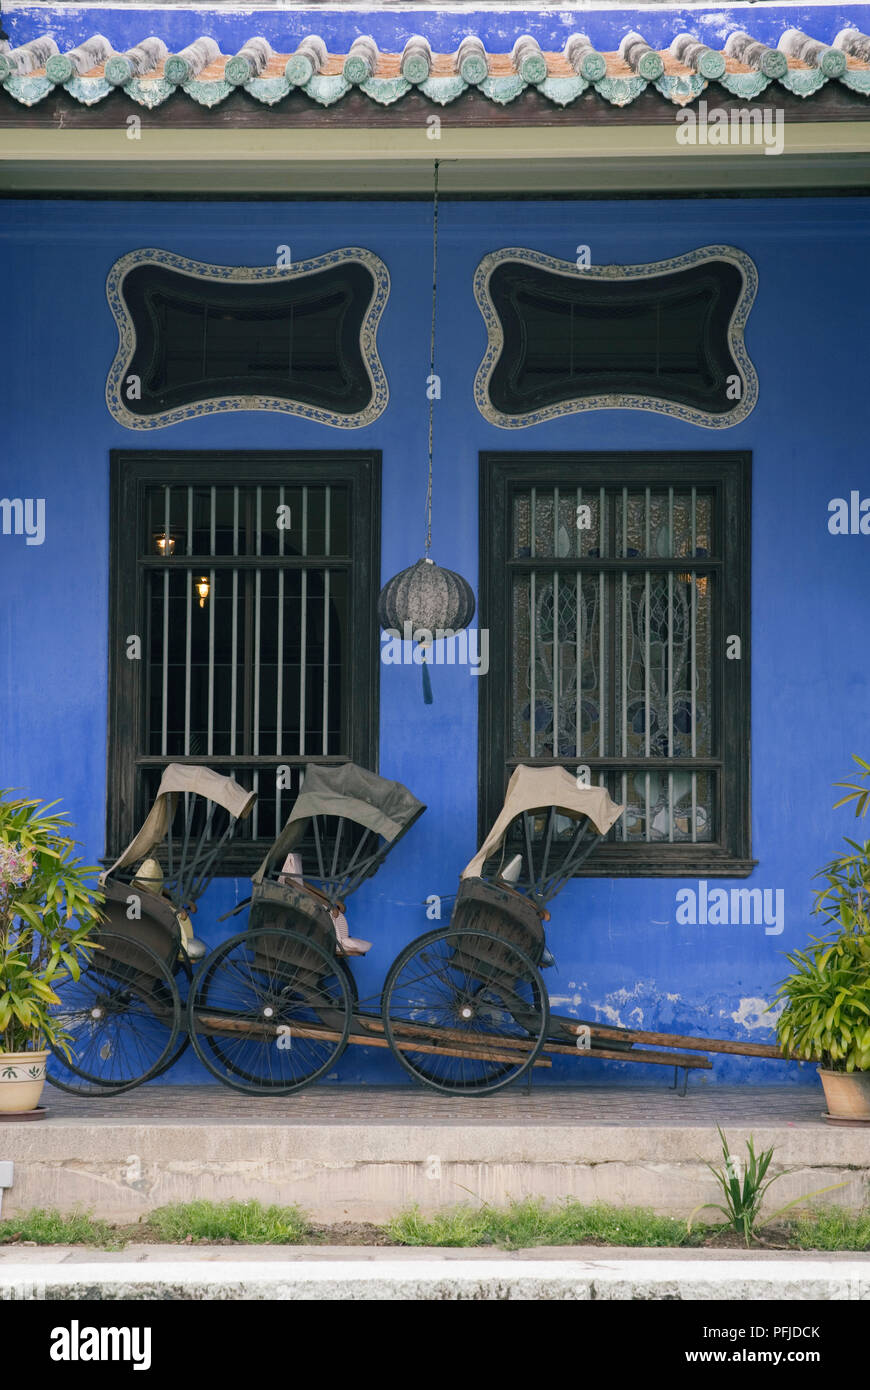 Malaysia, Penang, Georgetown, Chong Fatt Tze Mansion, blue facade detail with rickshaws parked outside Stock Photo